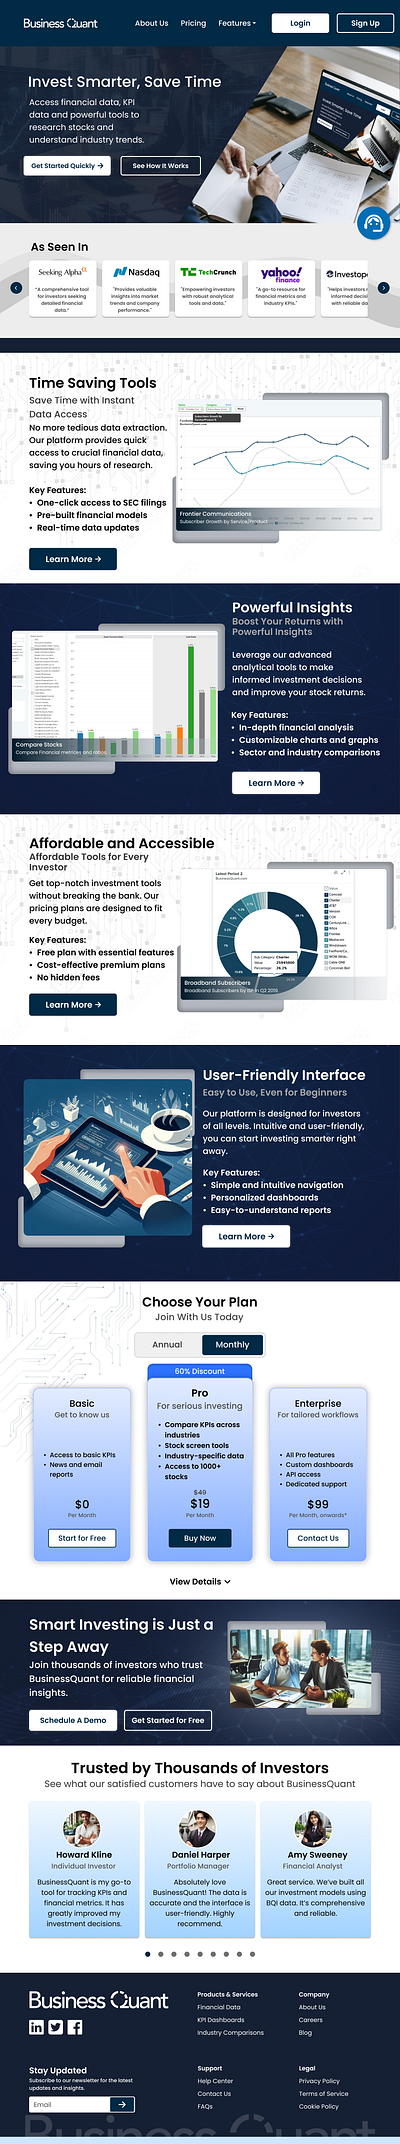 Business Quant Homepage Redesign analytics business business quant daily ui daily ui challenge design finance fresher investment redesign ui ux